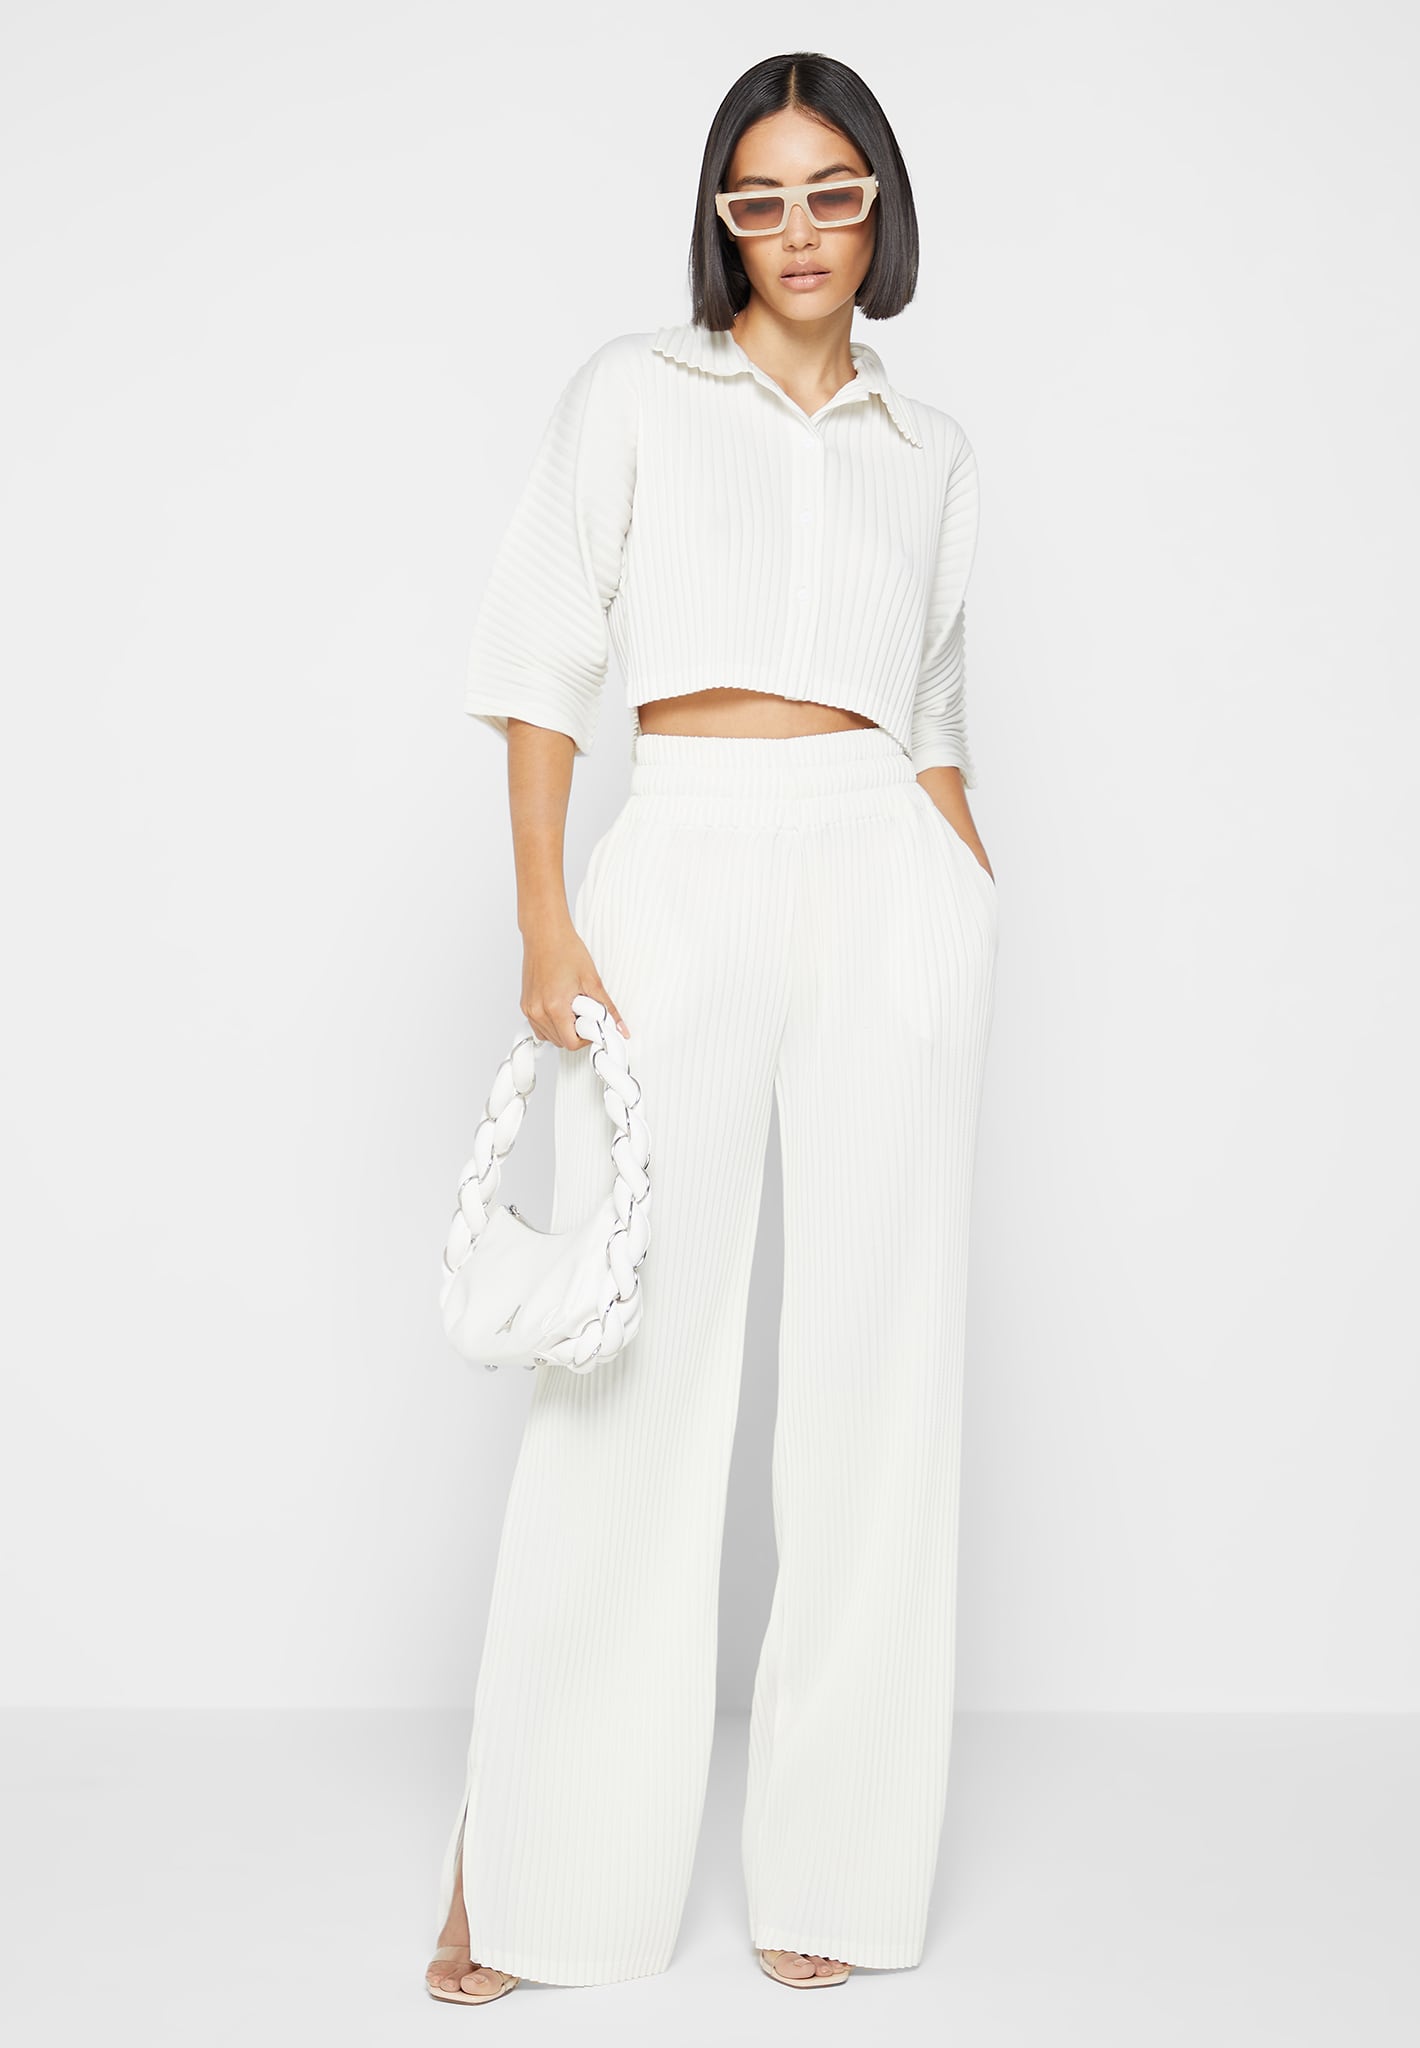 White Oxford Pleated Trouser